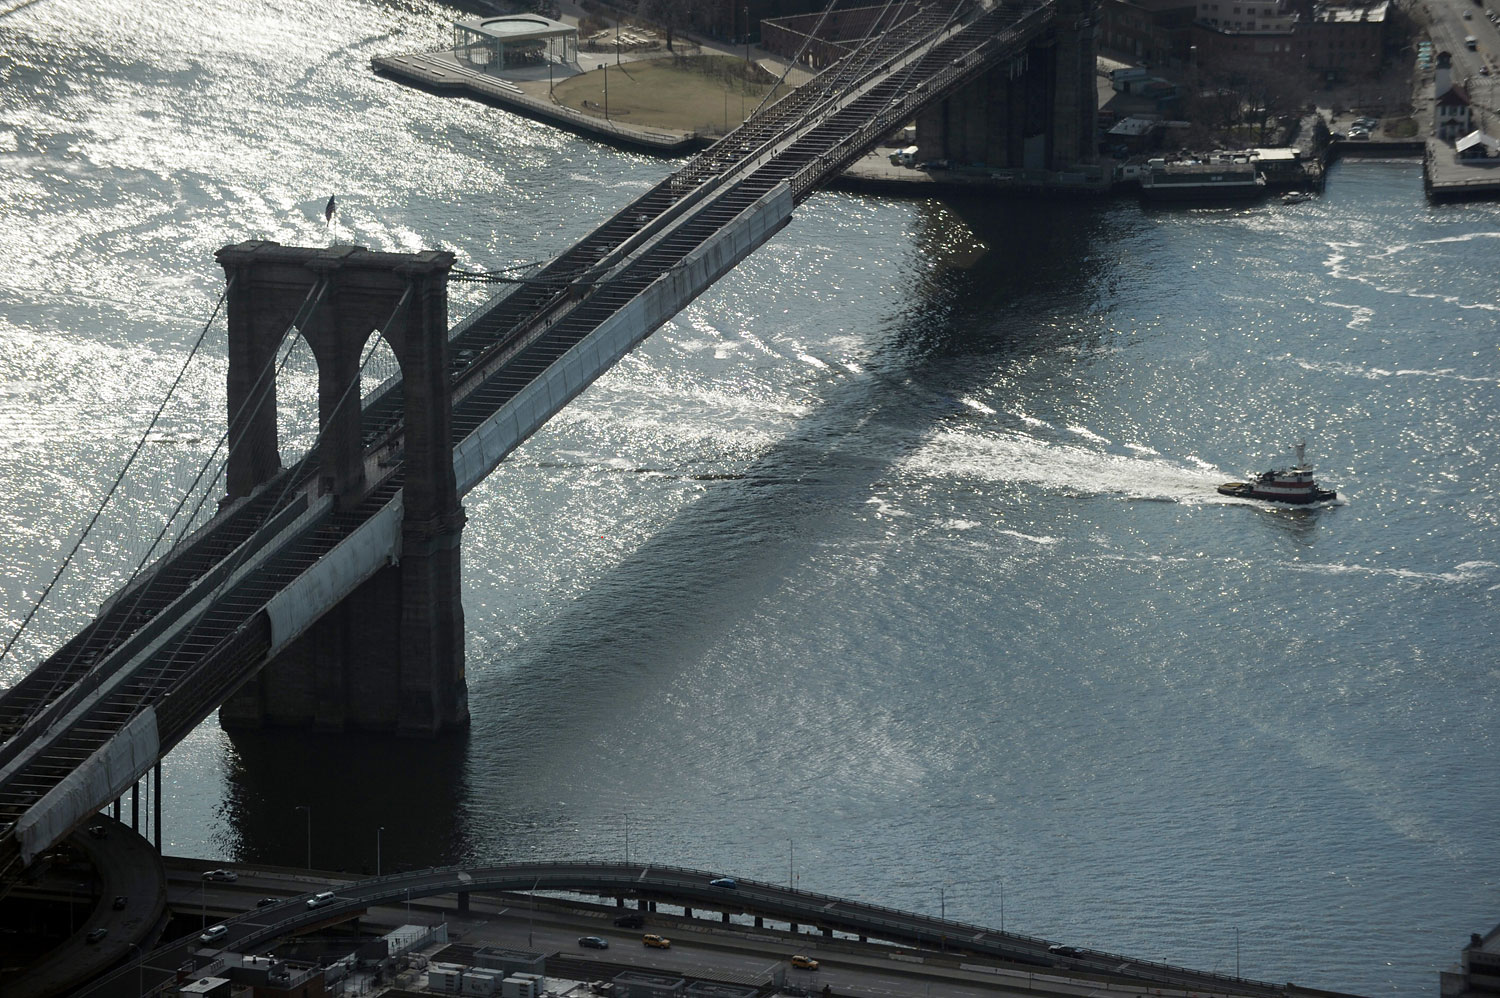 A tug boat passes under the Brooklyn Bridge as seen from One World Trade Center April 2, 2013 in New York.